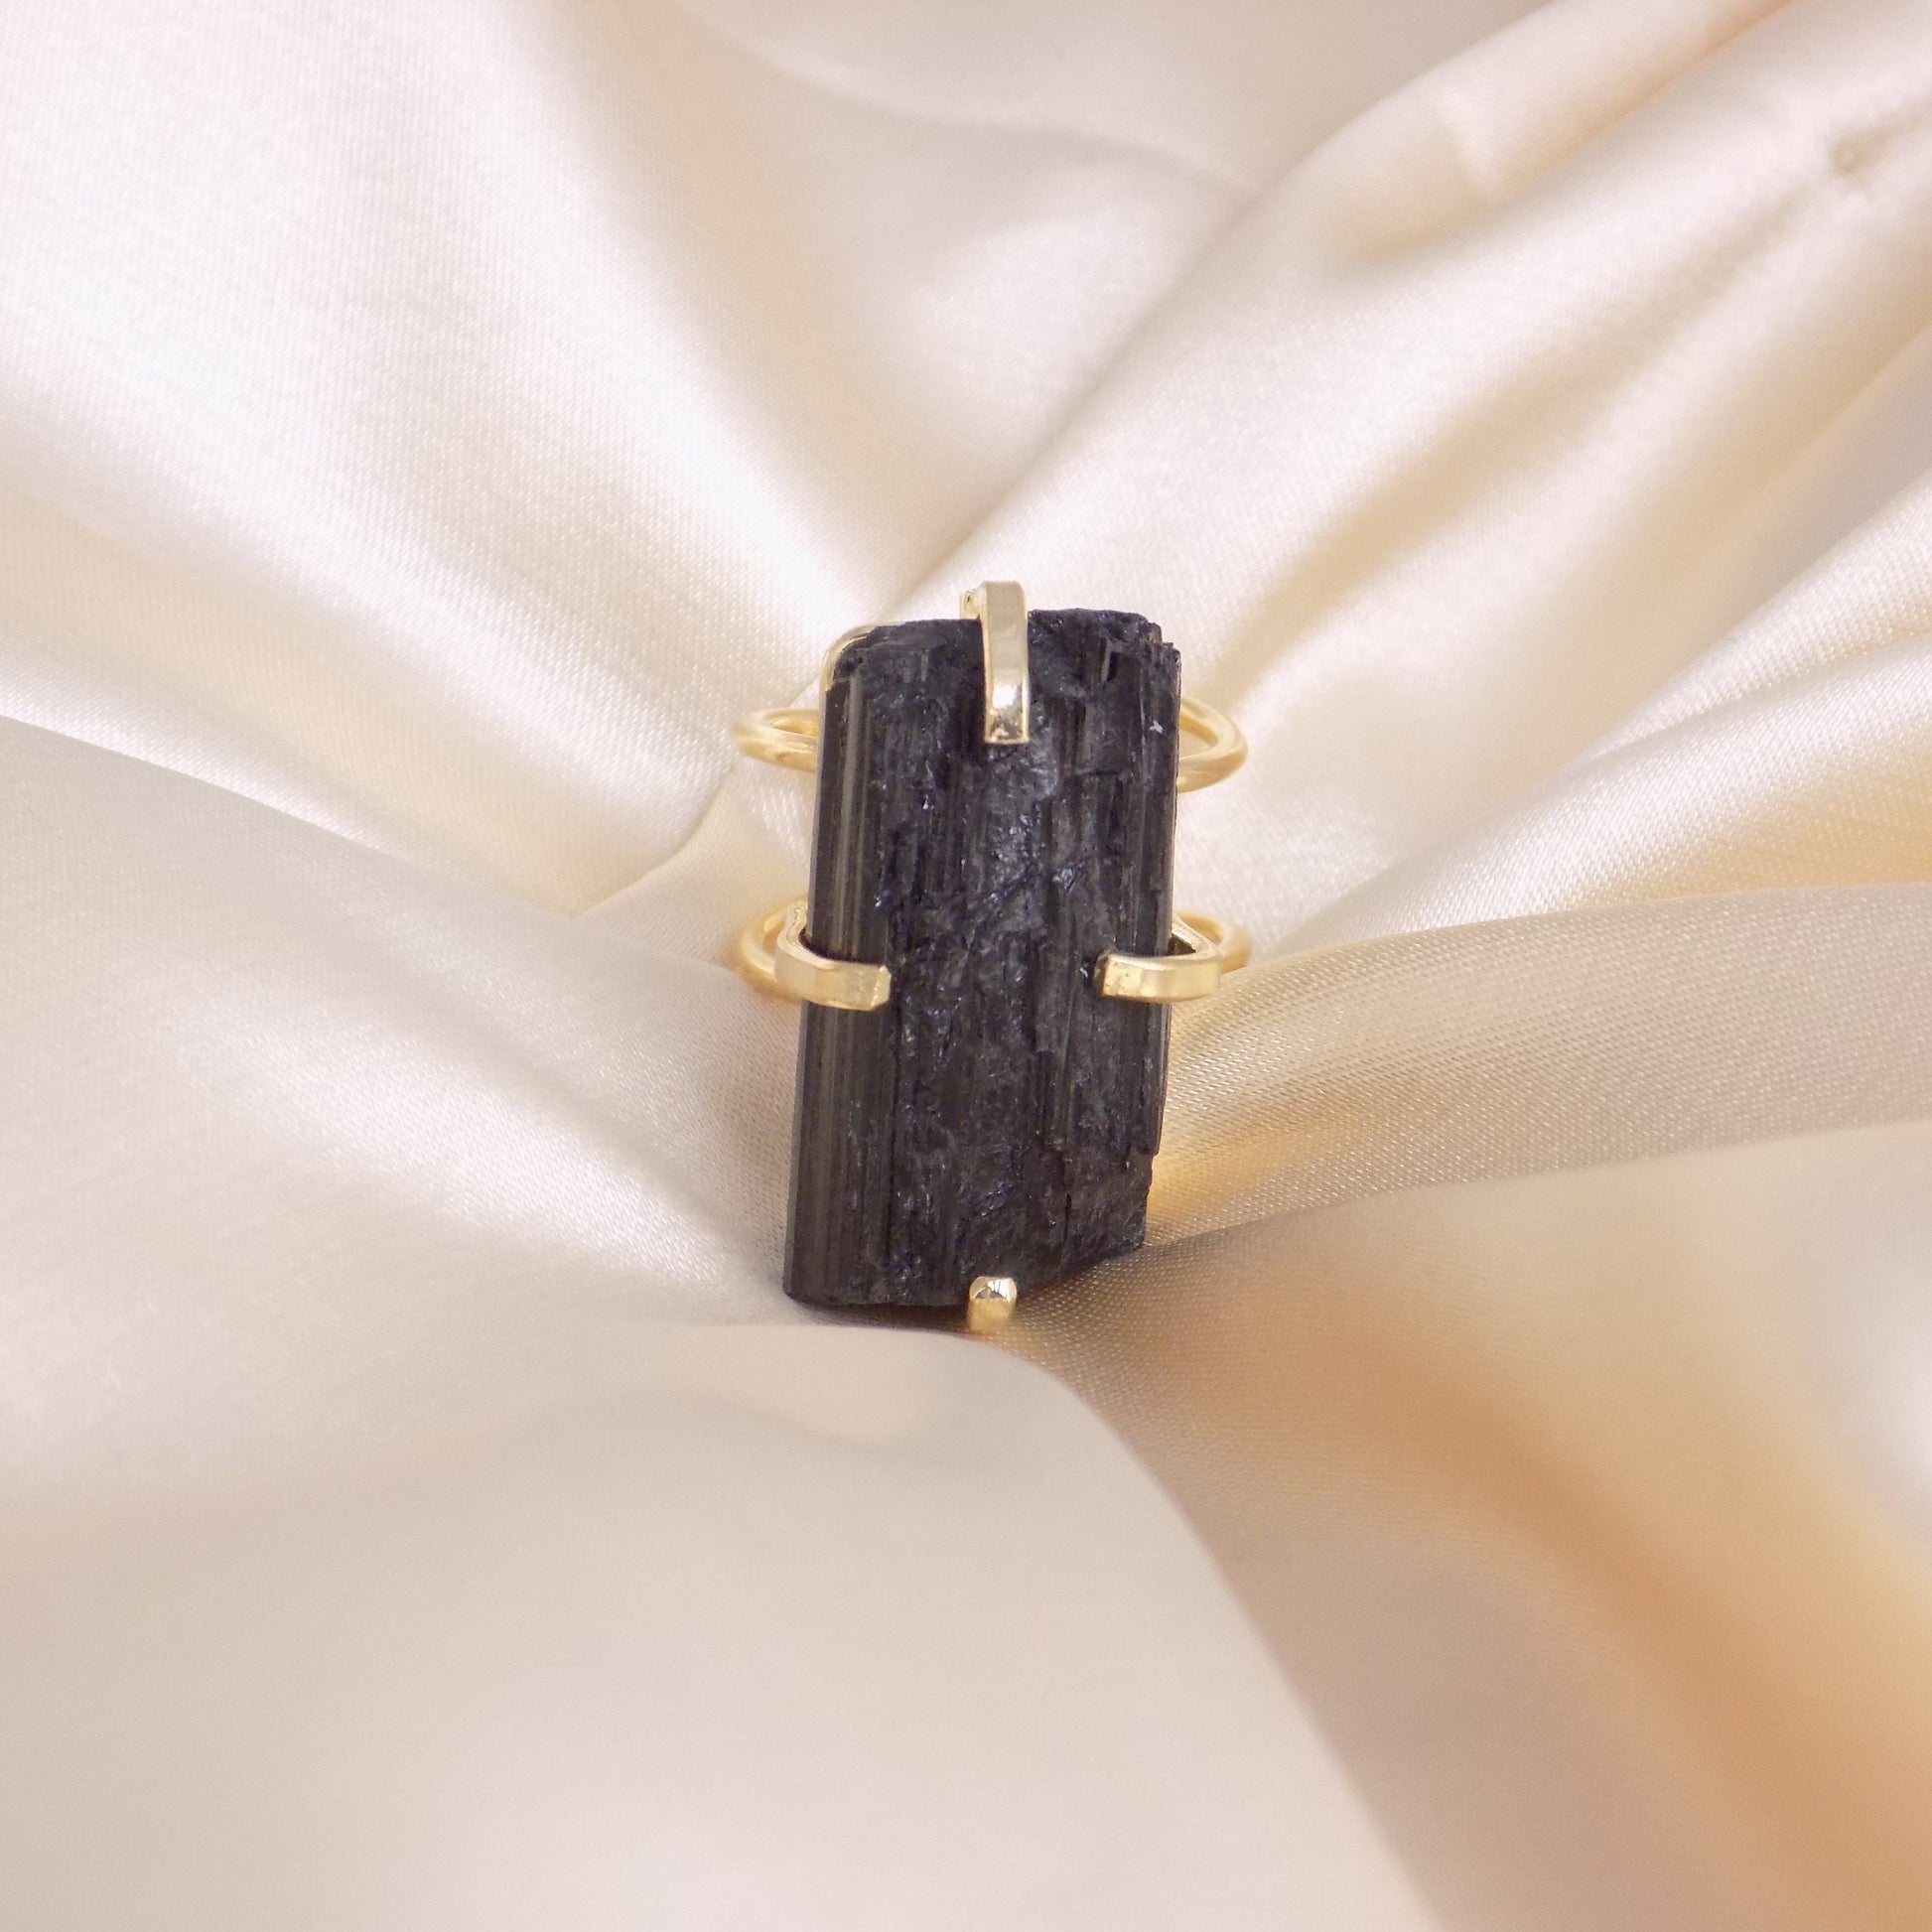 Unique Boho Crystal Ring, Black Tourmaline Ring Adjustable, Raw Black Crystal Statement Jewelry, Healing Crystal Gift, G15-205